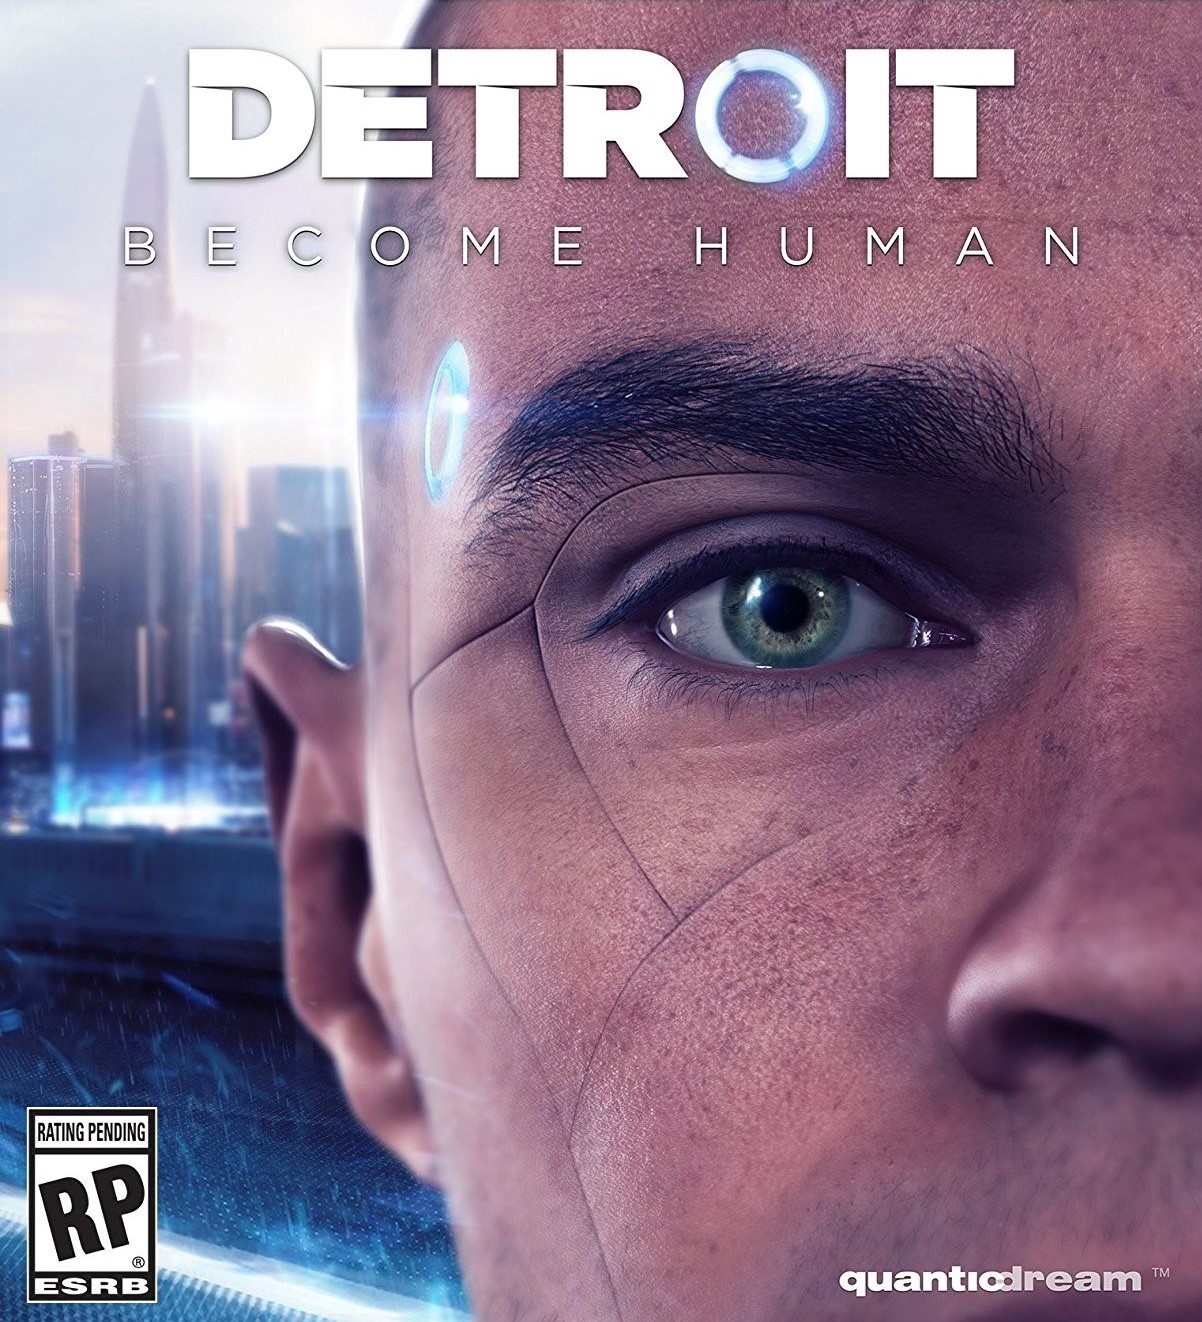 detroit become human pc demo download